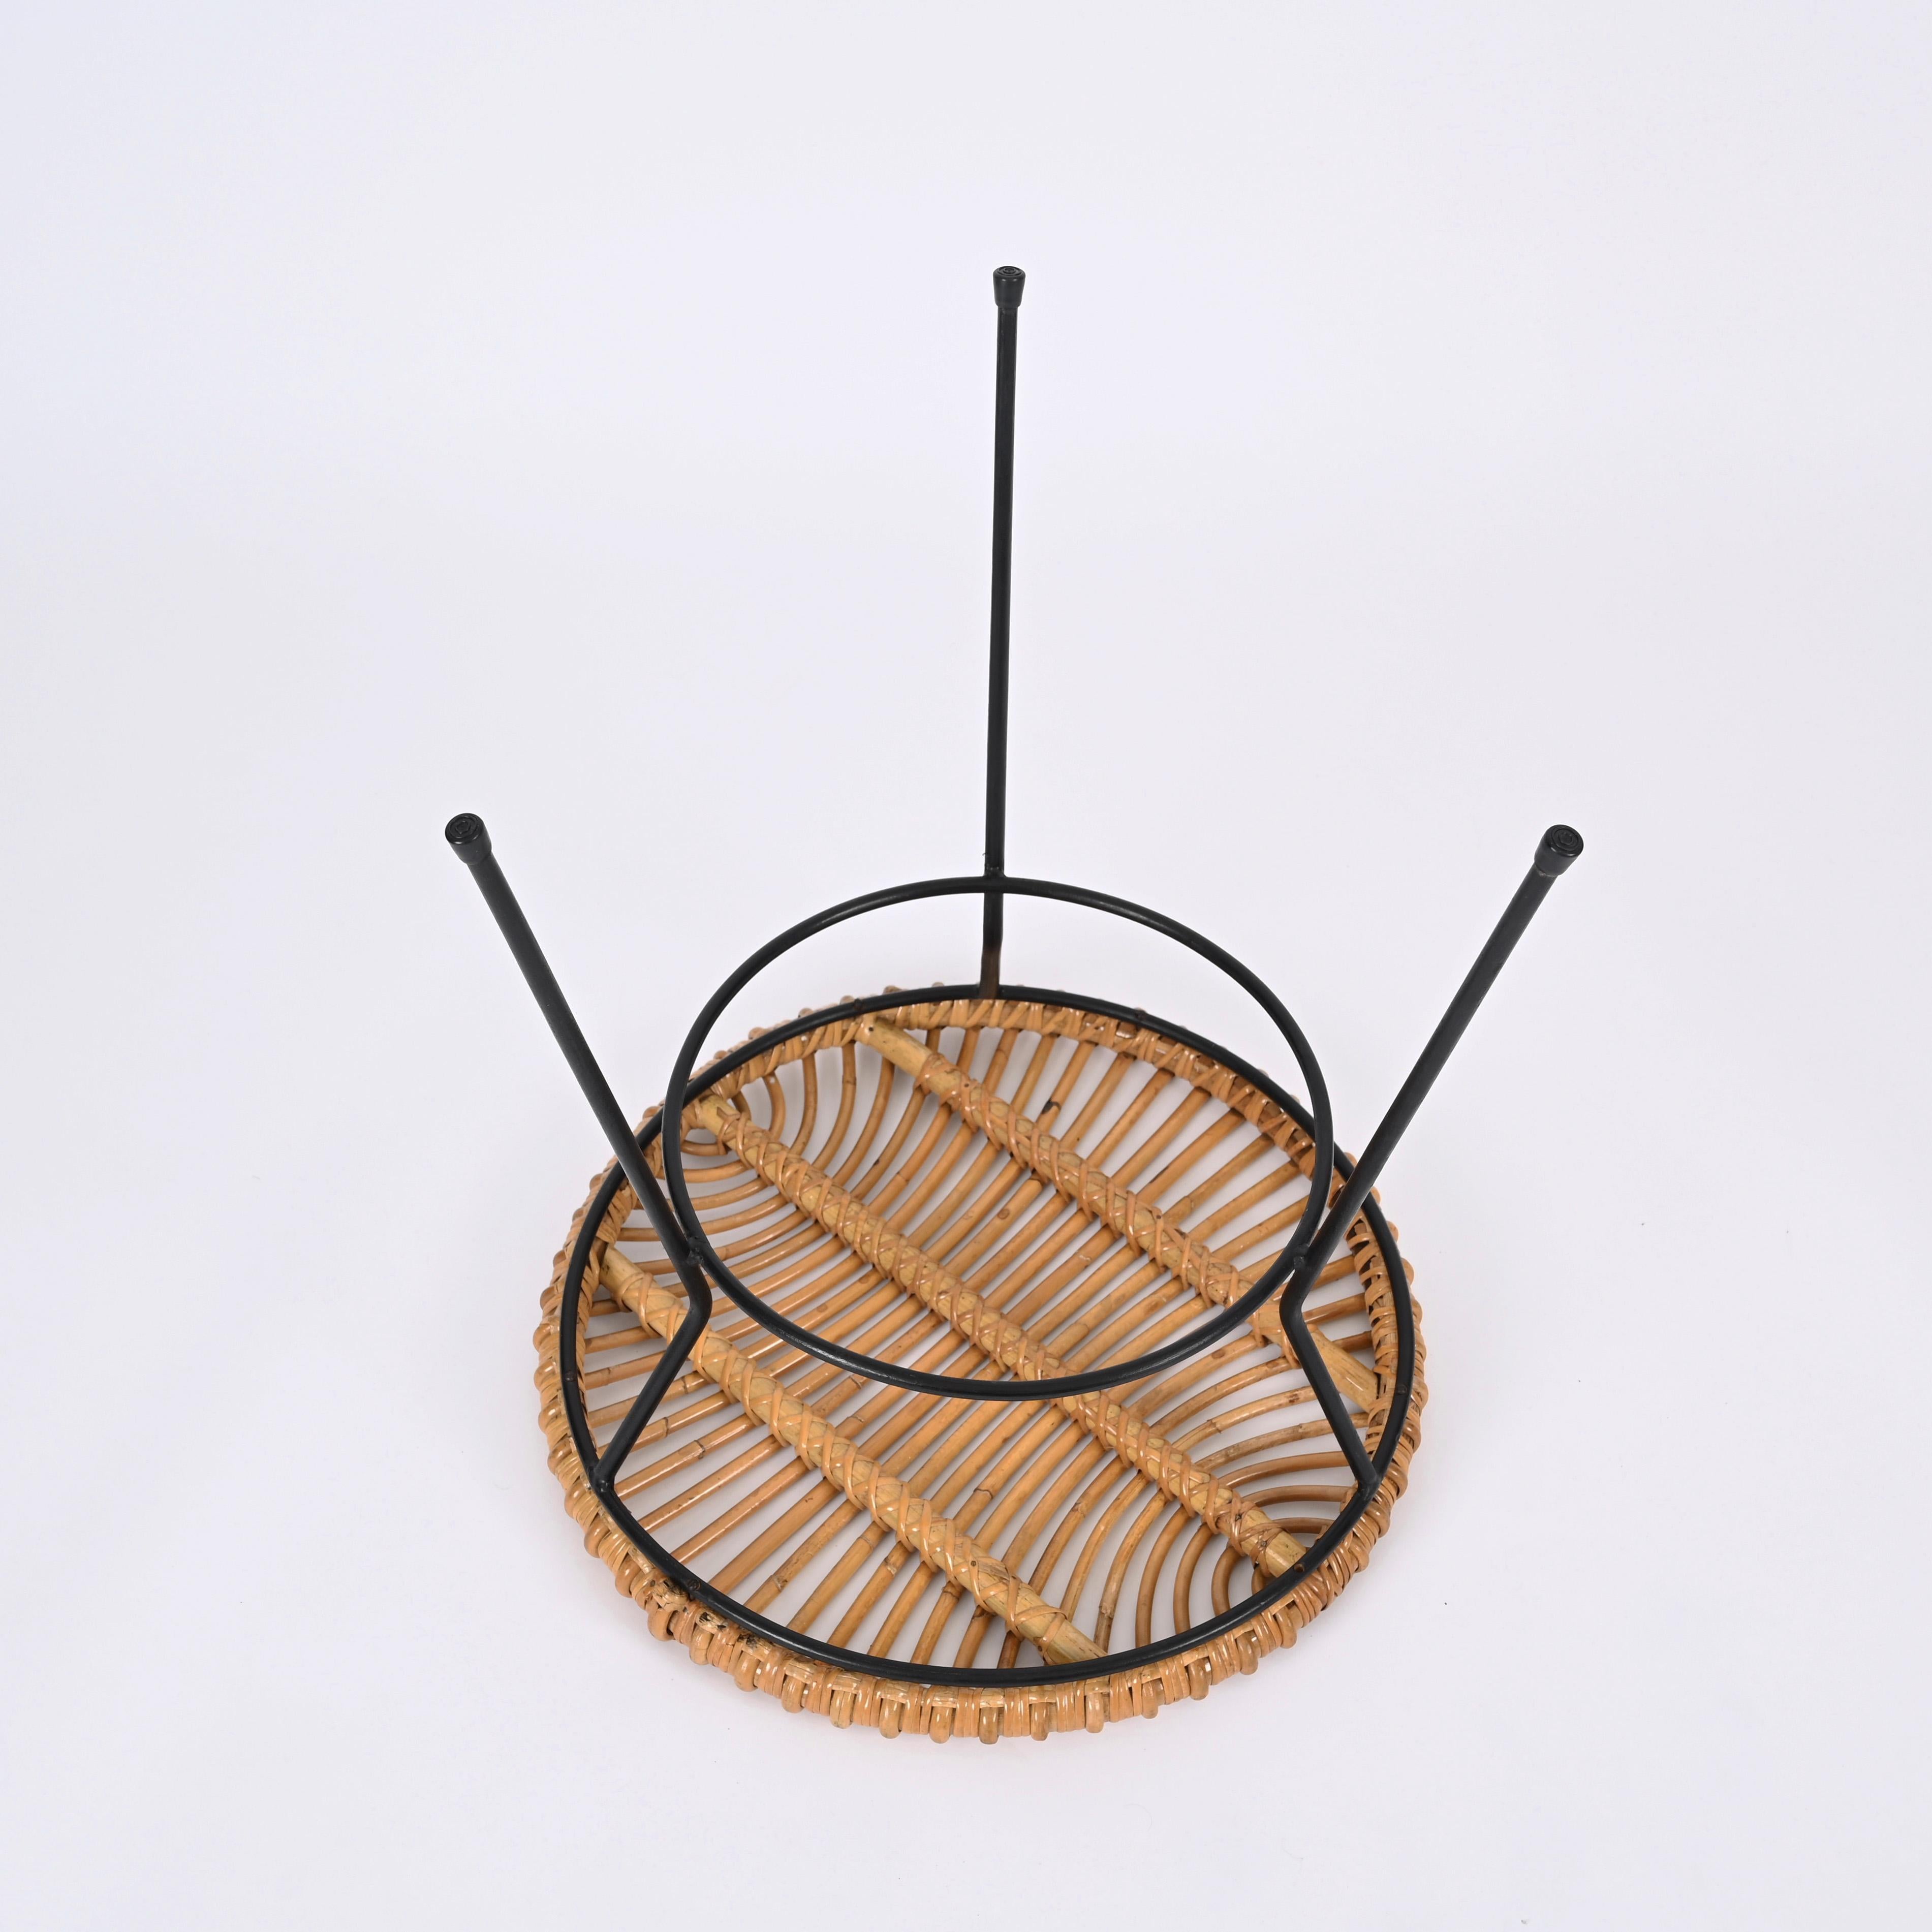 French Riviera Rattan, Wicker and Iron Coffee Table, Roberto Mango, Italy 1960s For Sale 6